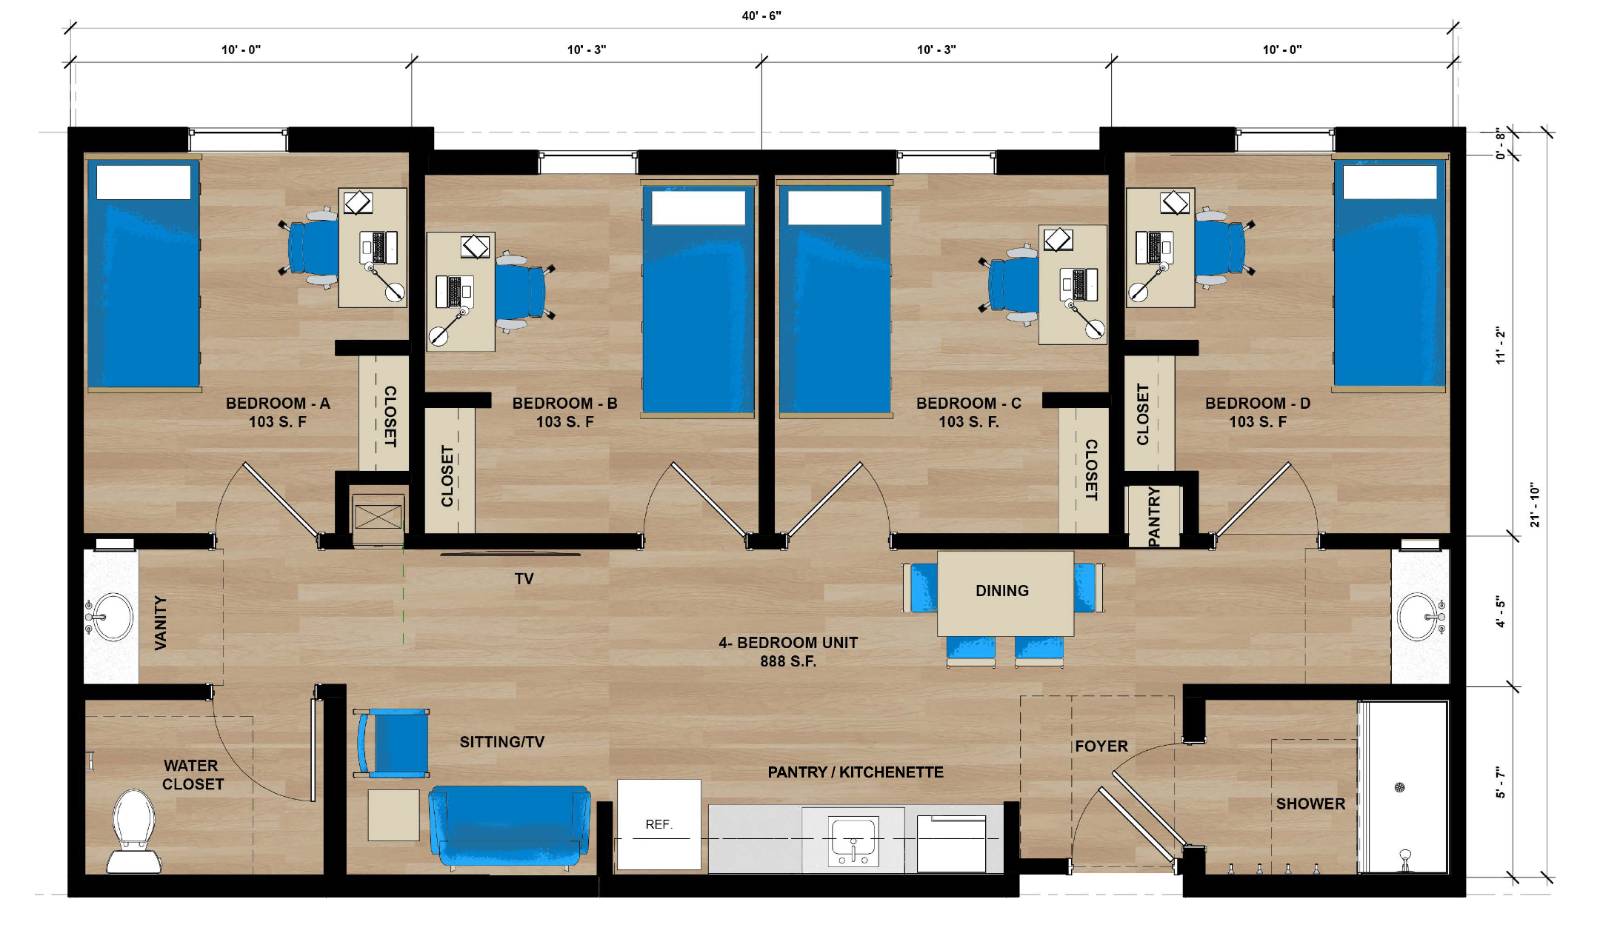 Floorplan for the new residence hall